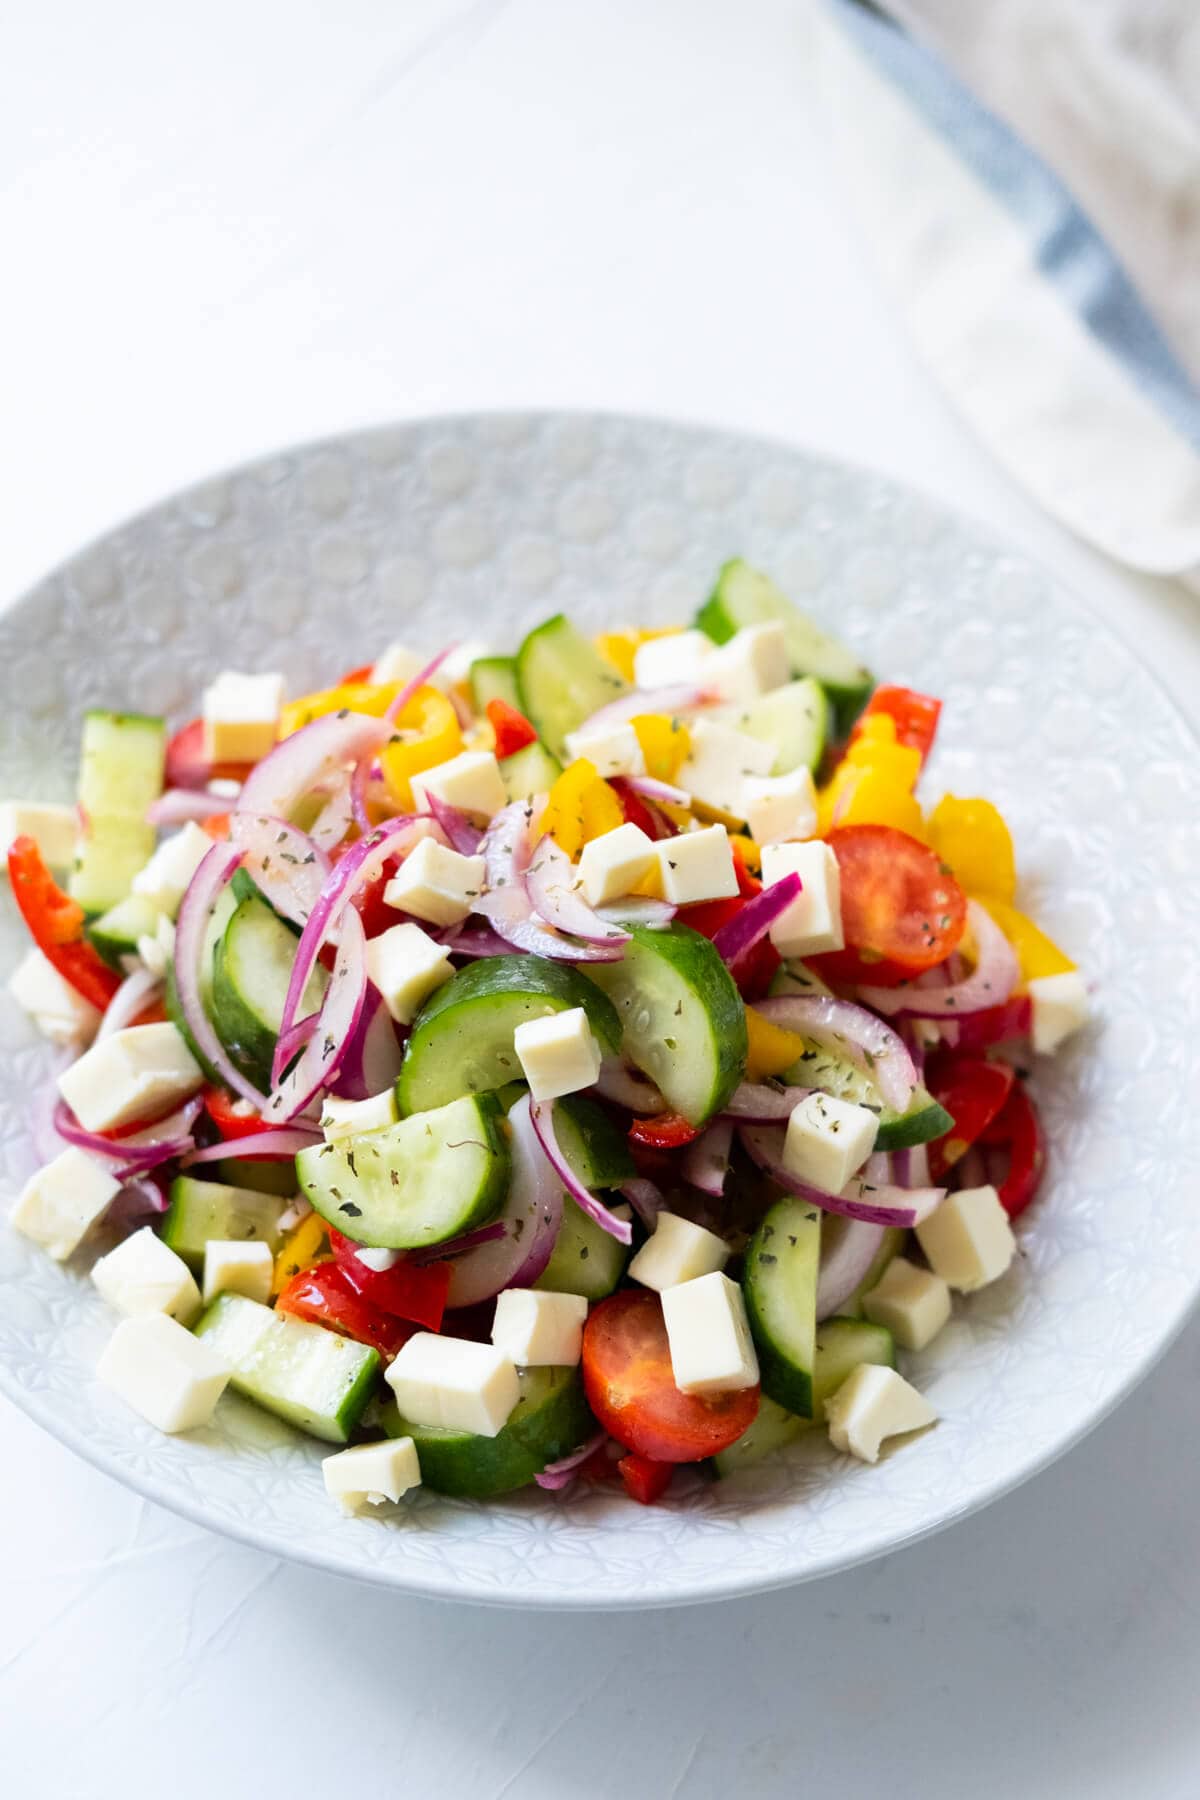 Salad consist of fresh cucumber pieces, red bell pepper pieces, yellow bell pepper pieces, cherry tomatoes, red onions, and feta cheese in a white shallow bowl. 